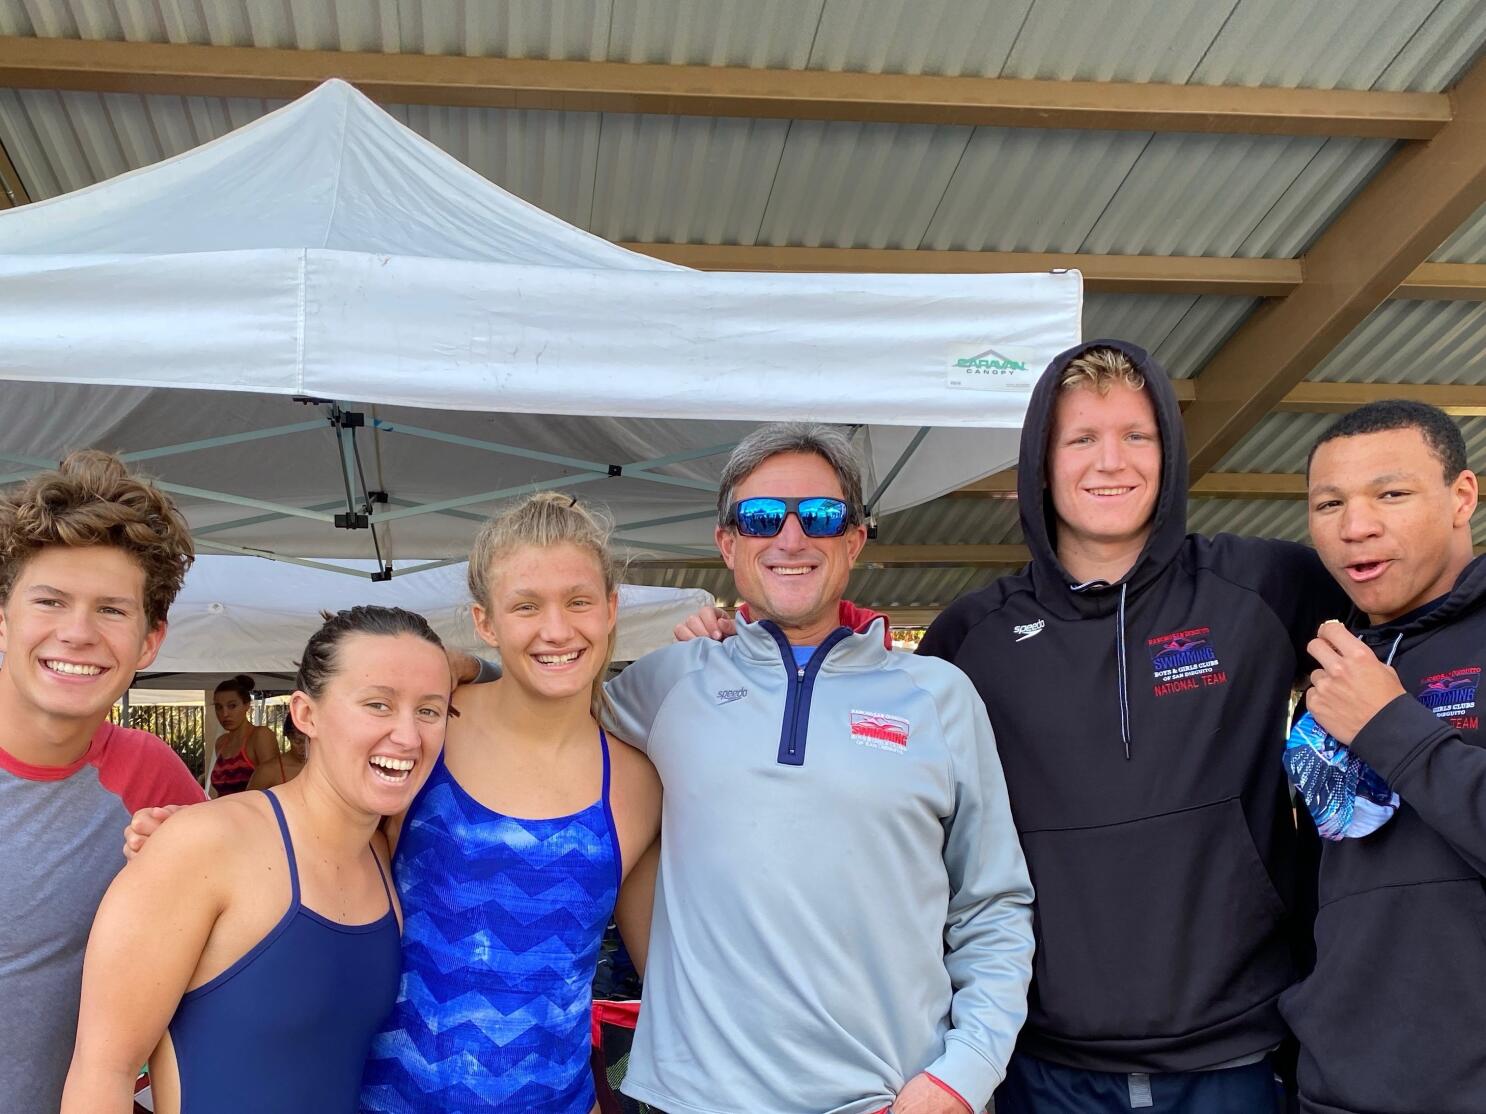 Proud of RSD's Sectional - Rancho San Dieguito Swim Team